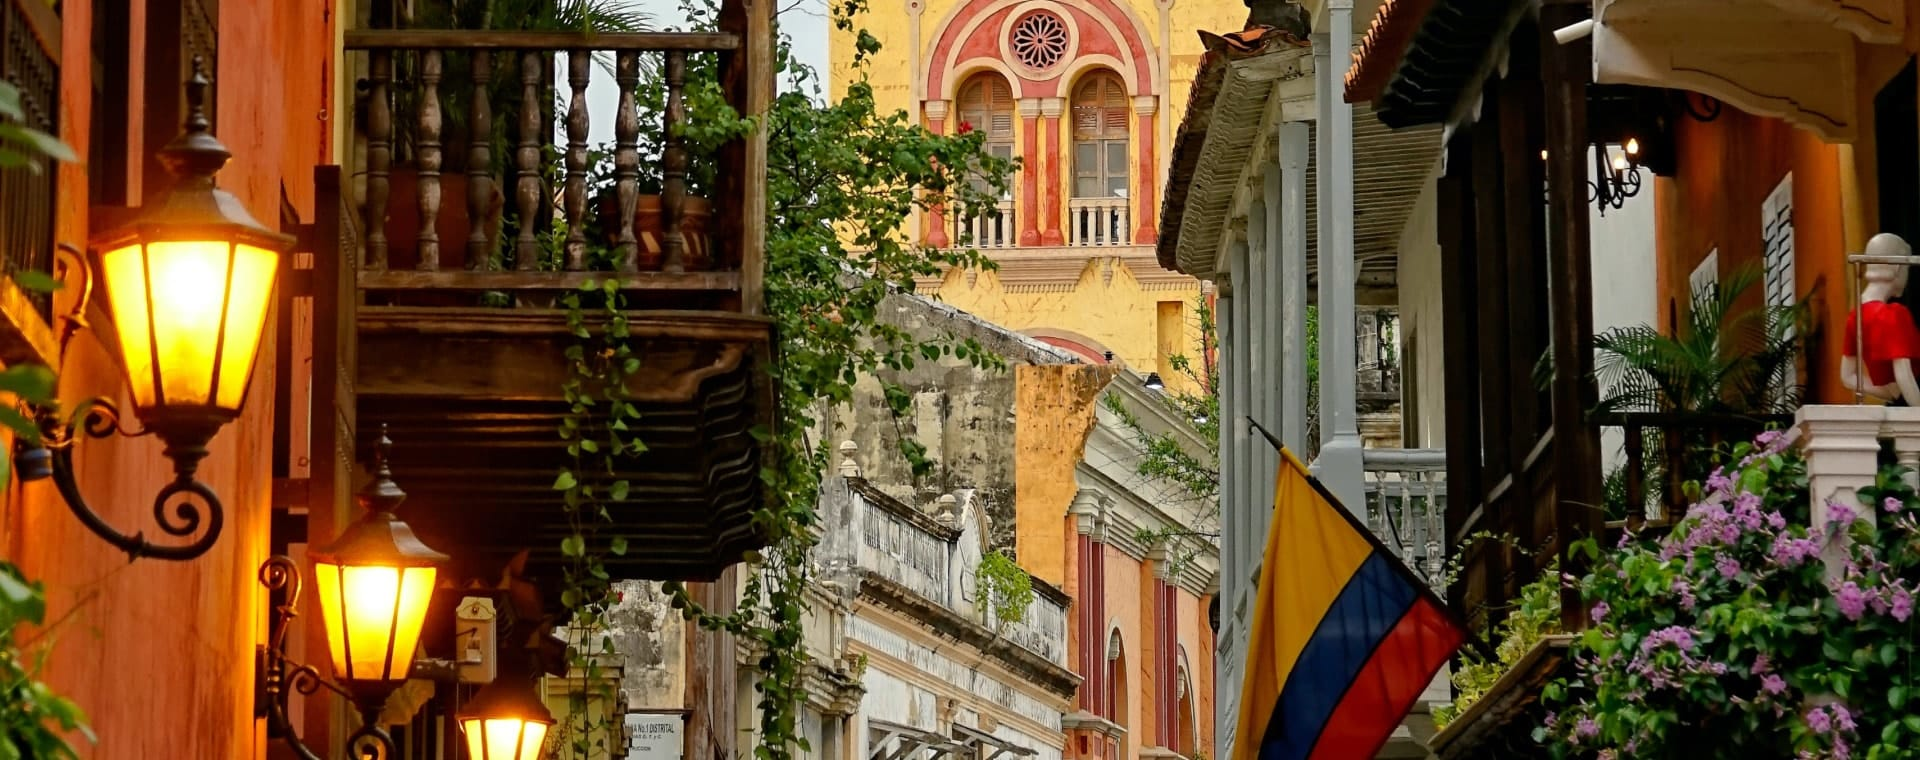 A narrow street in colombia with colorful buildings.